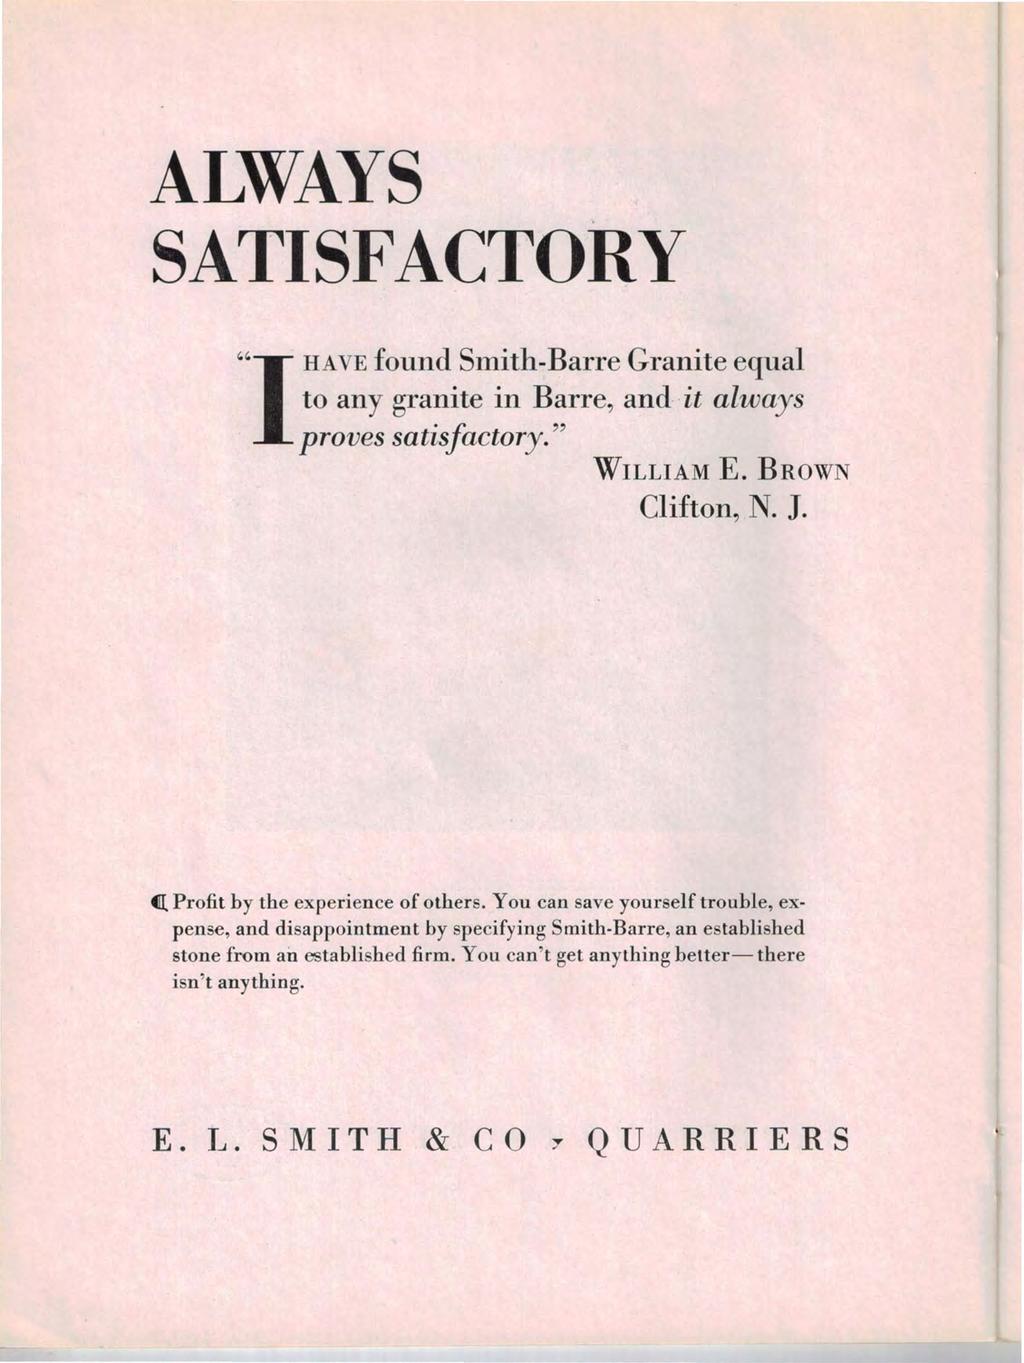 ALWAYS SATISF ACTORY "I HAVE found Smith-Barre Granite equal to any granite in Barre, and- it always proves satisfactory." WILLIAM E. BROWN Clifton, N. 1. 4ll Profit by the experience of others.